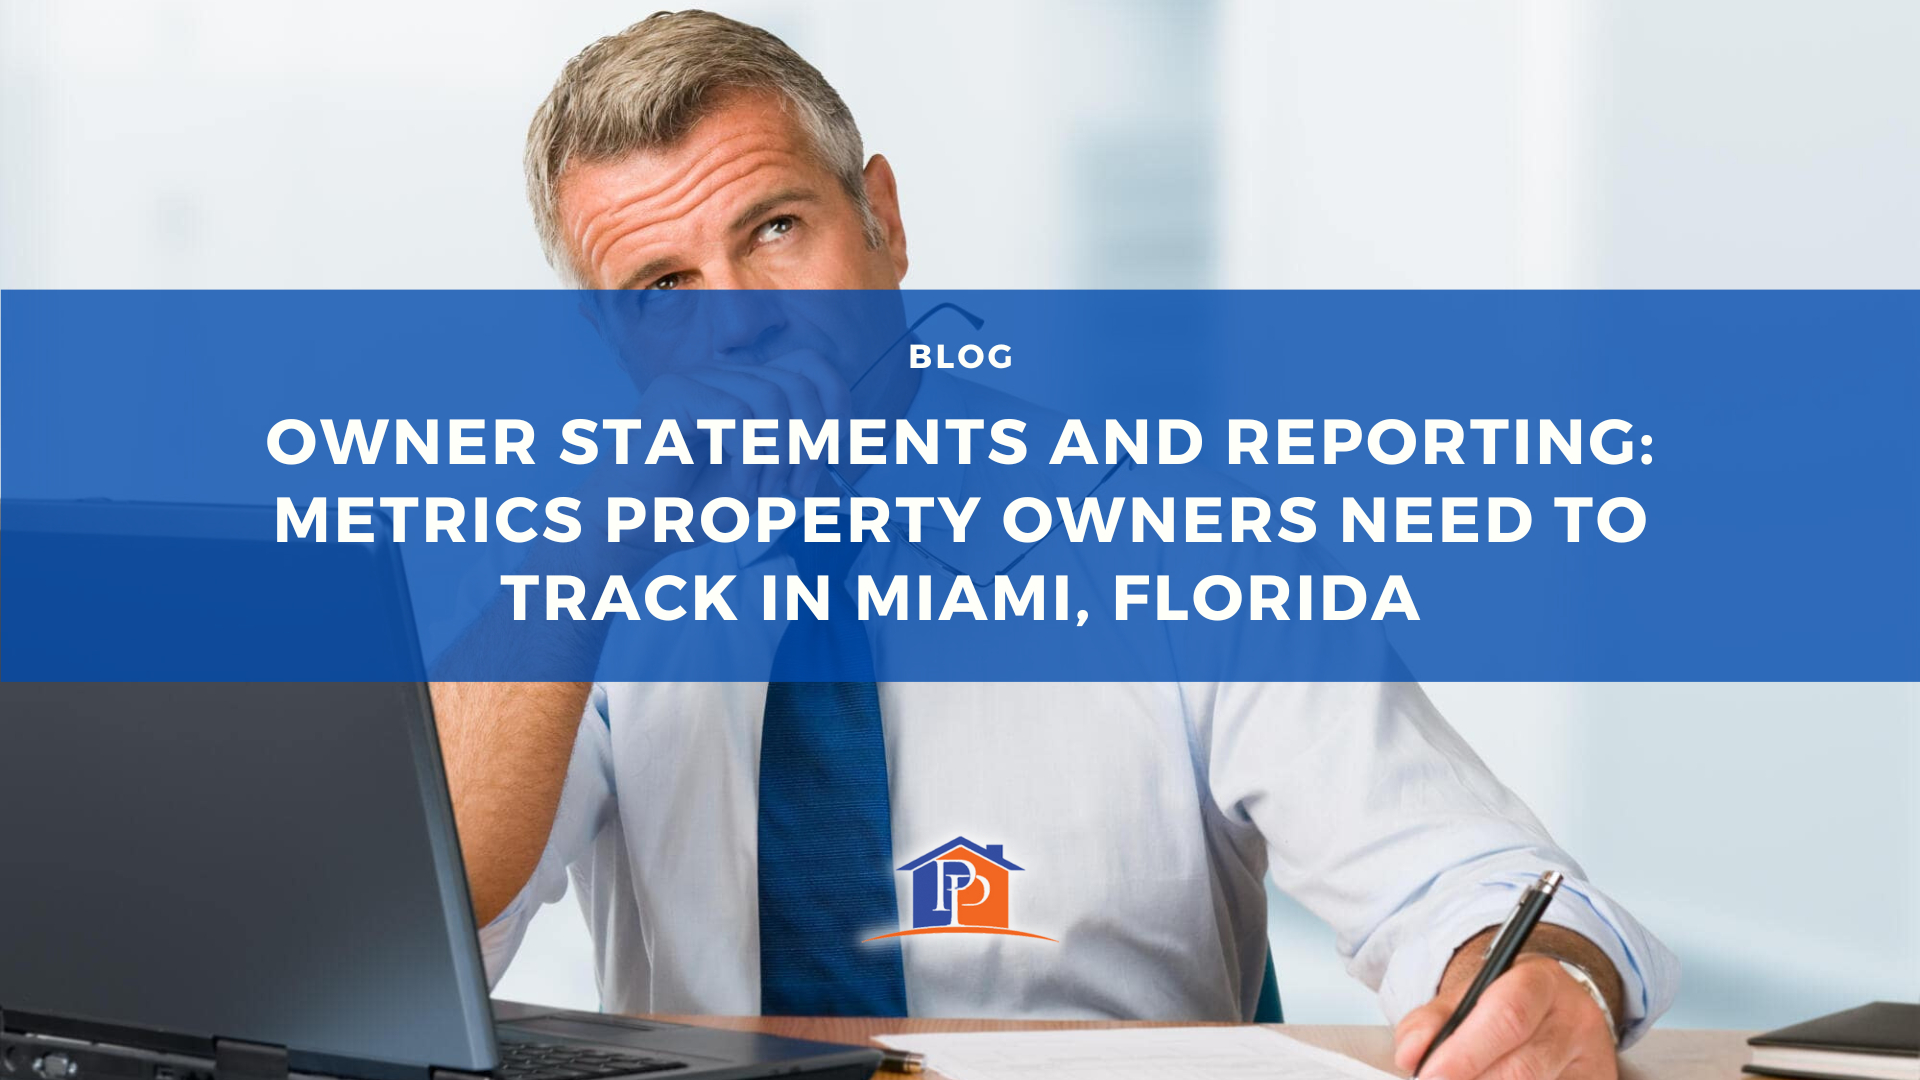 Owner Statements and Reporting: Metrics Property Owners Need to Track in Miami, Florida